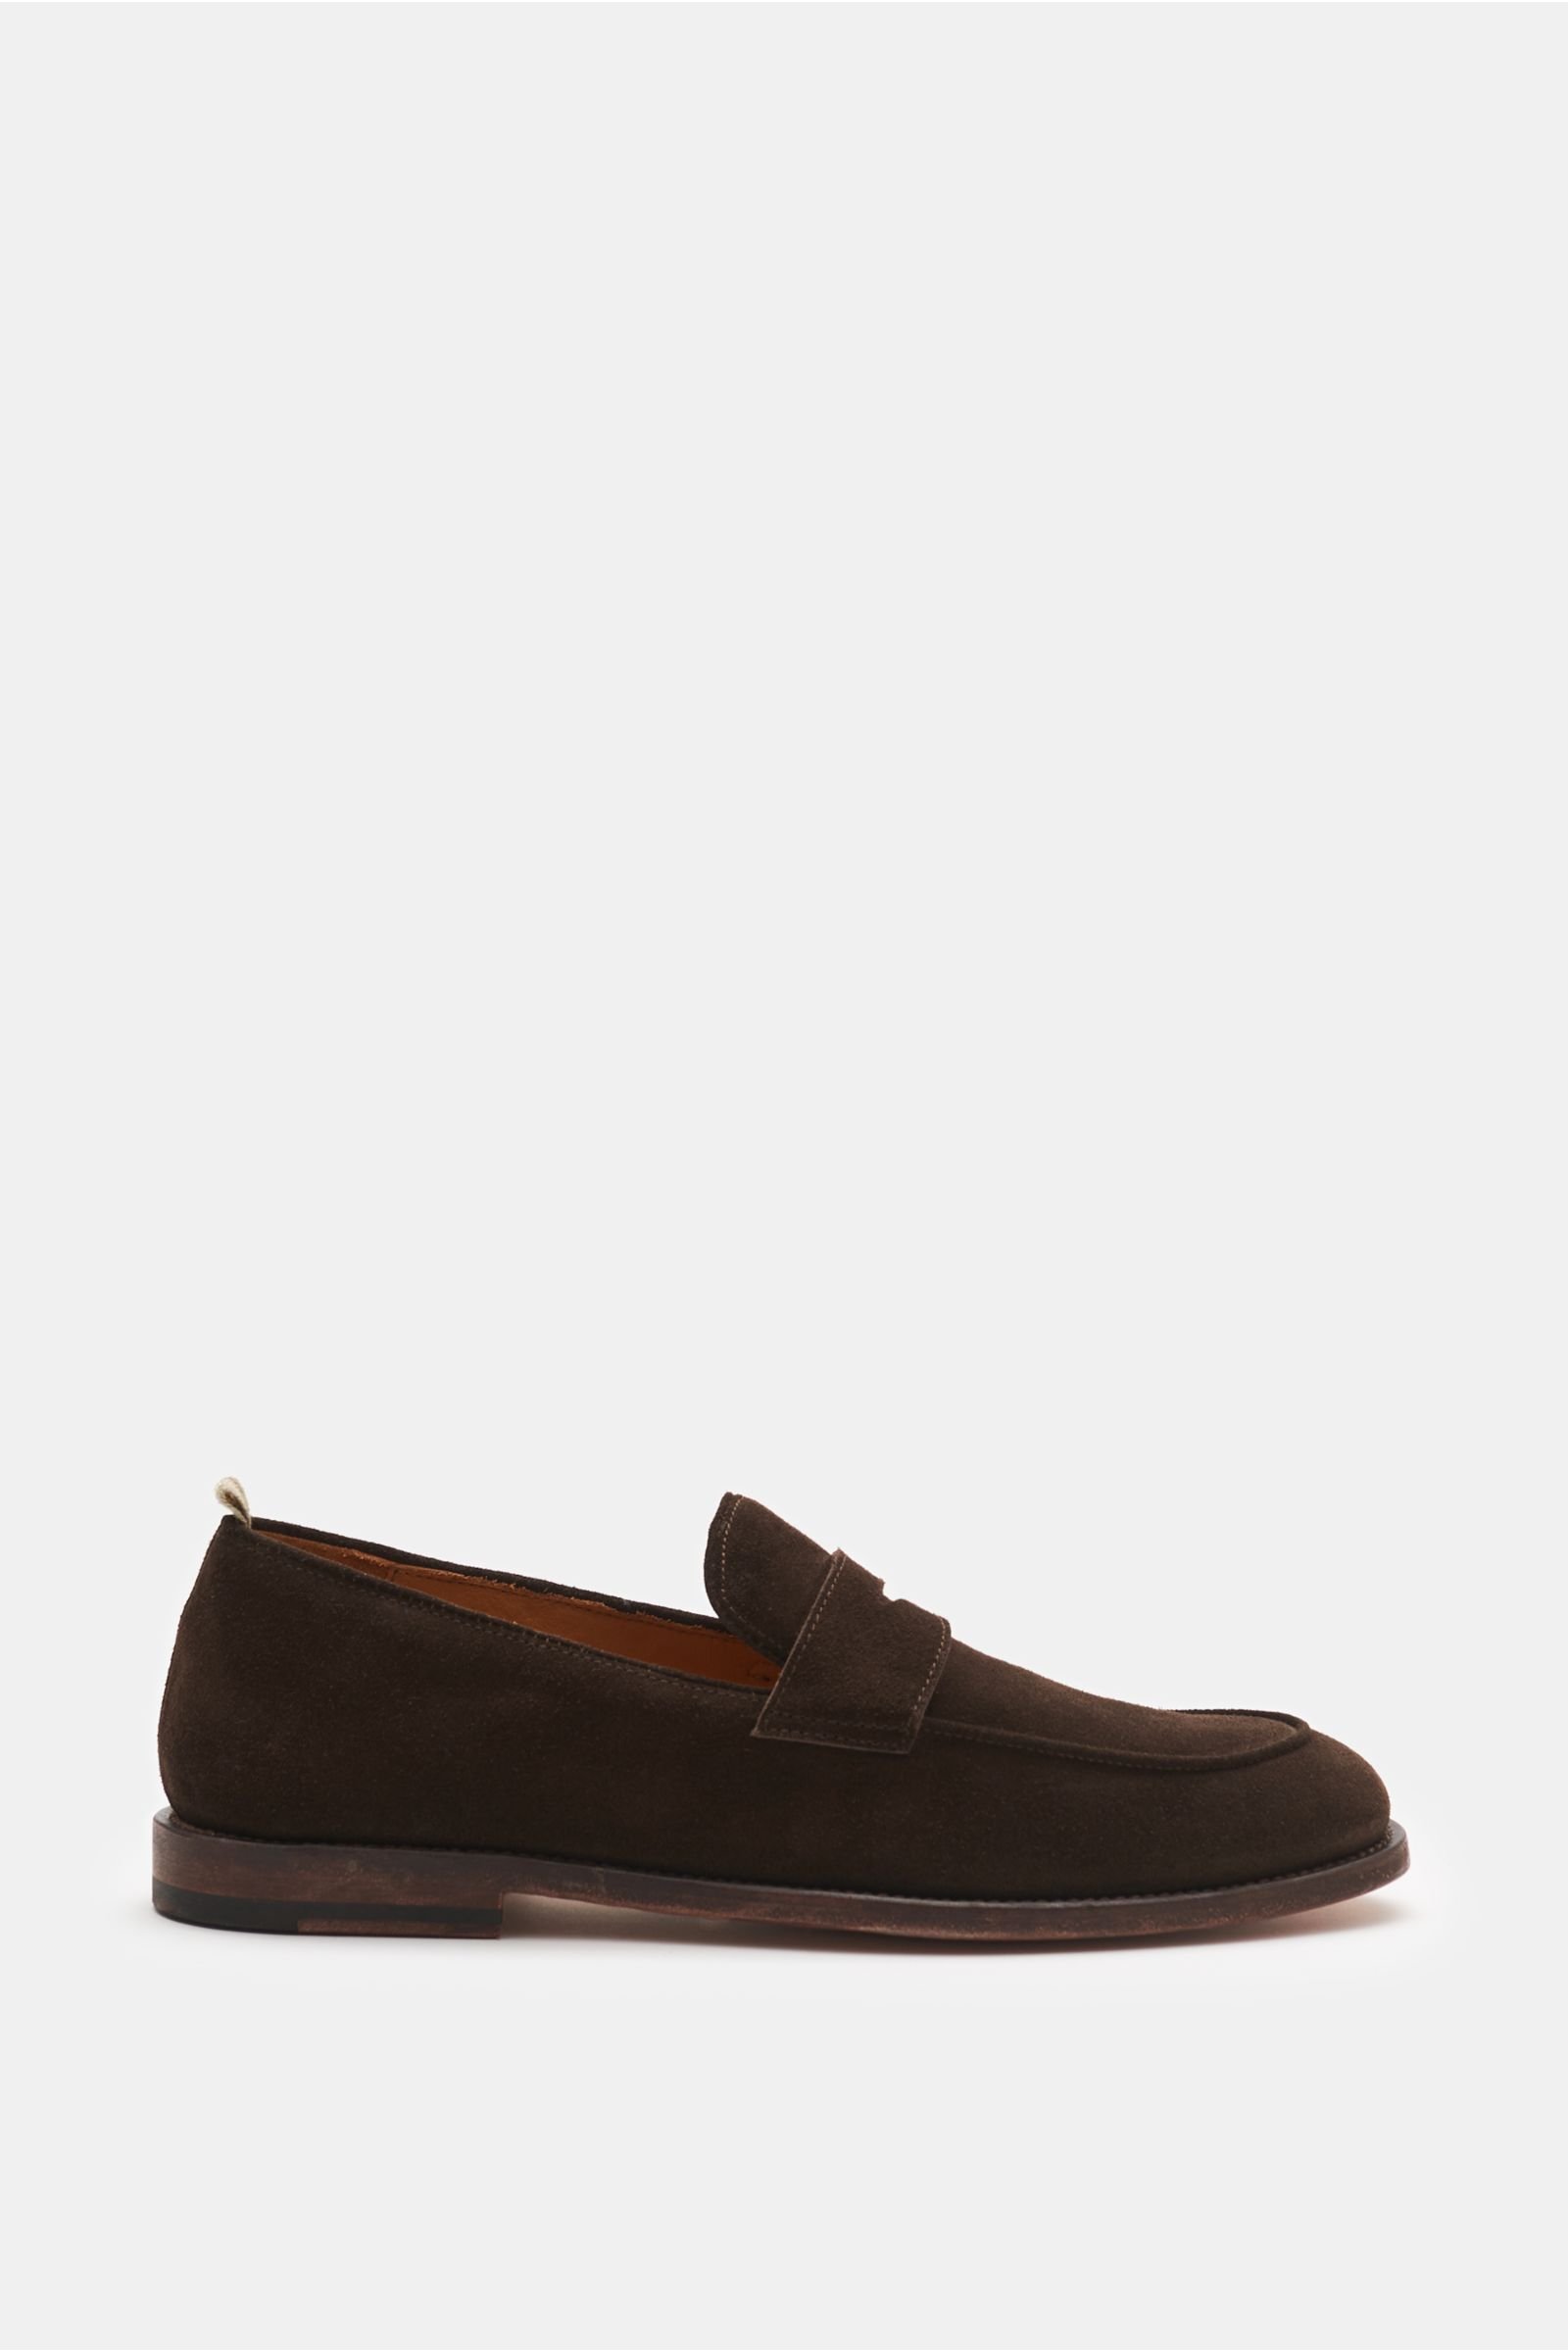 Penny loafers 'Opera 006' dark brown